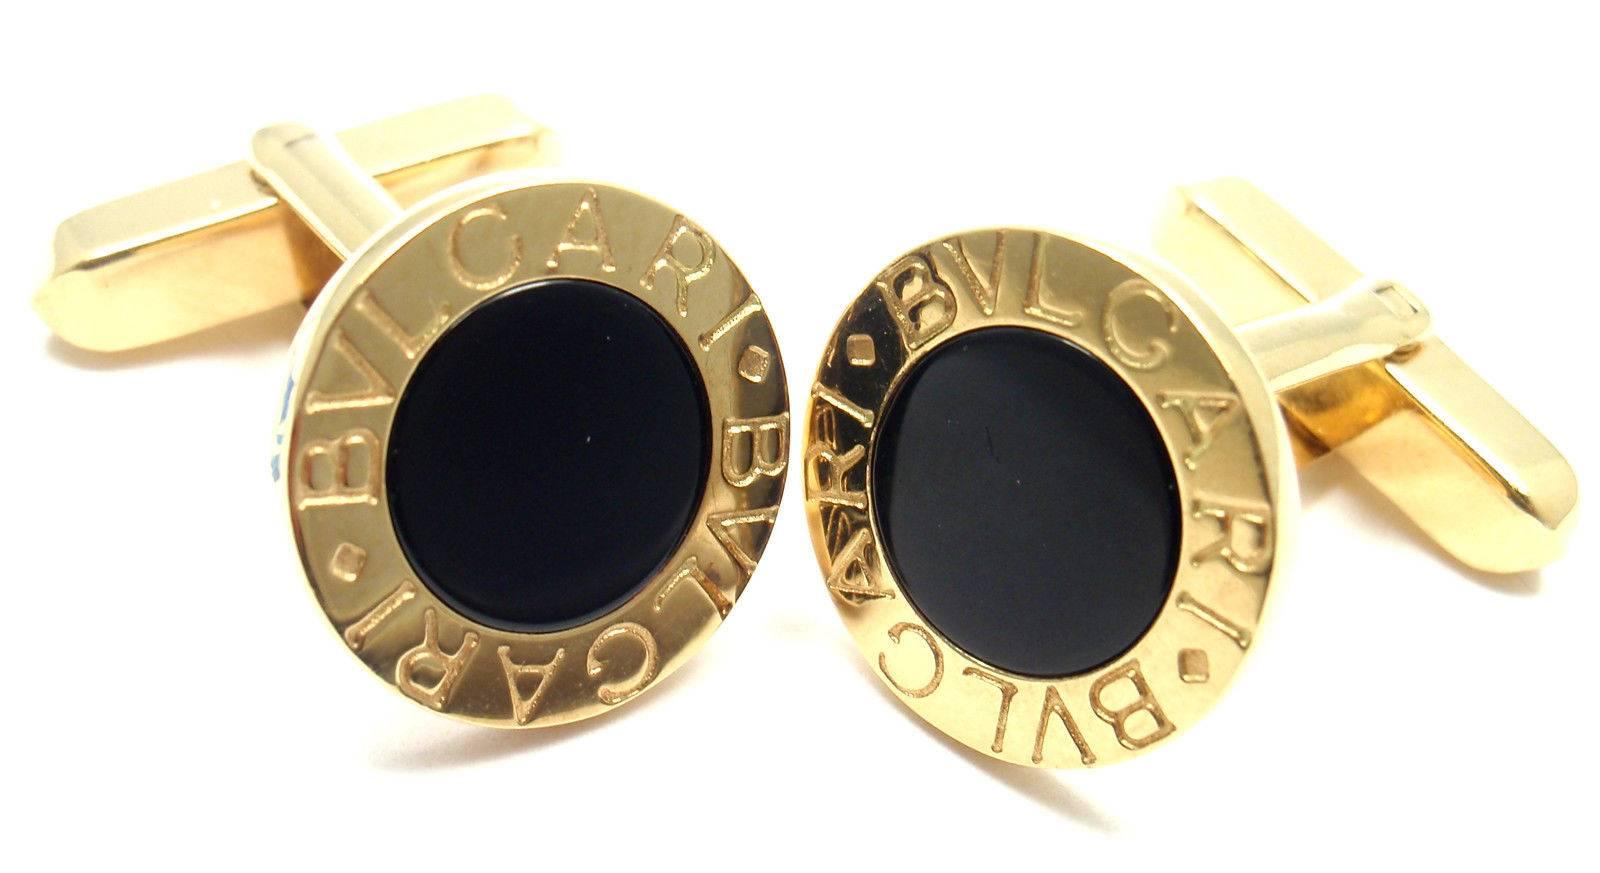 18k Yellow Gold Black Onyx Cufflinks by Bulgari. 
With 2 Black Onyx stones.

Details: 
Measurements: 15mm x 26mm
Weight: 12.1 grams
Stamped Hallmarks: Bvlgari 750 Made in Italy
*Free Shipping within the United States*

YOUR PRICE: